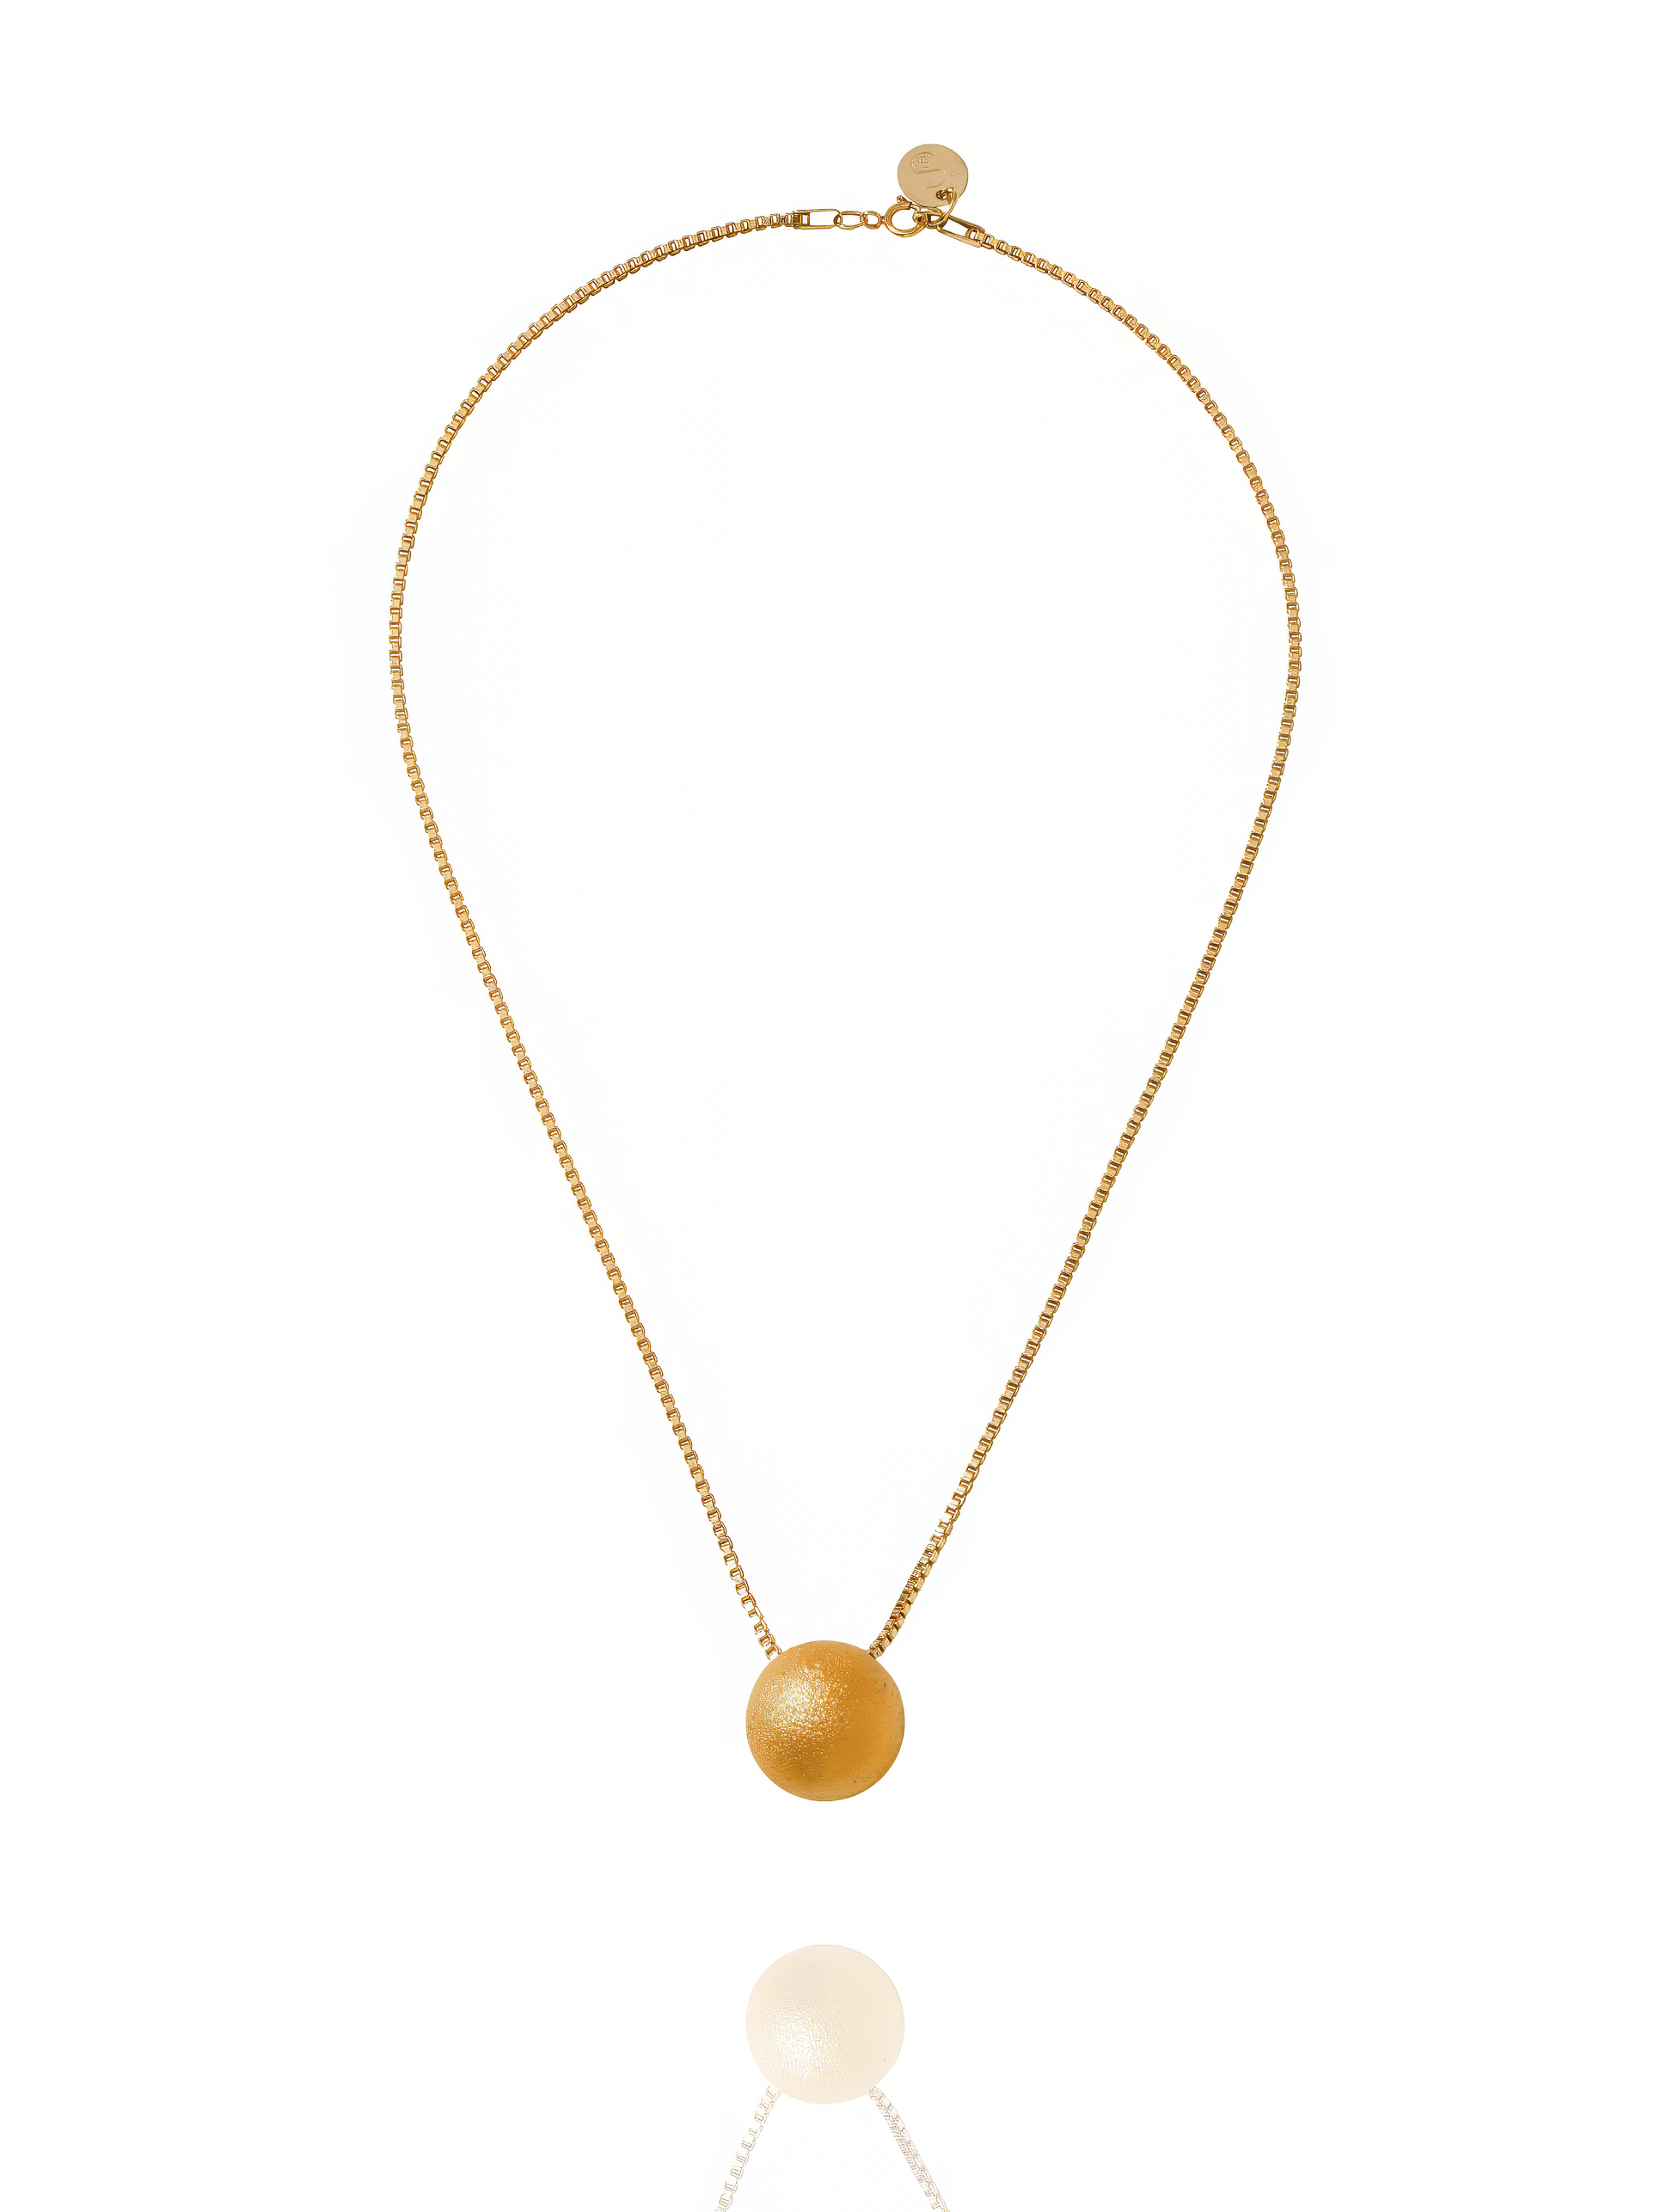 Gold Alloy Soul Sphere Necklace white background